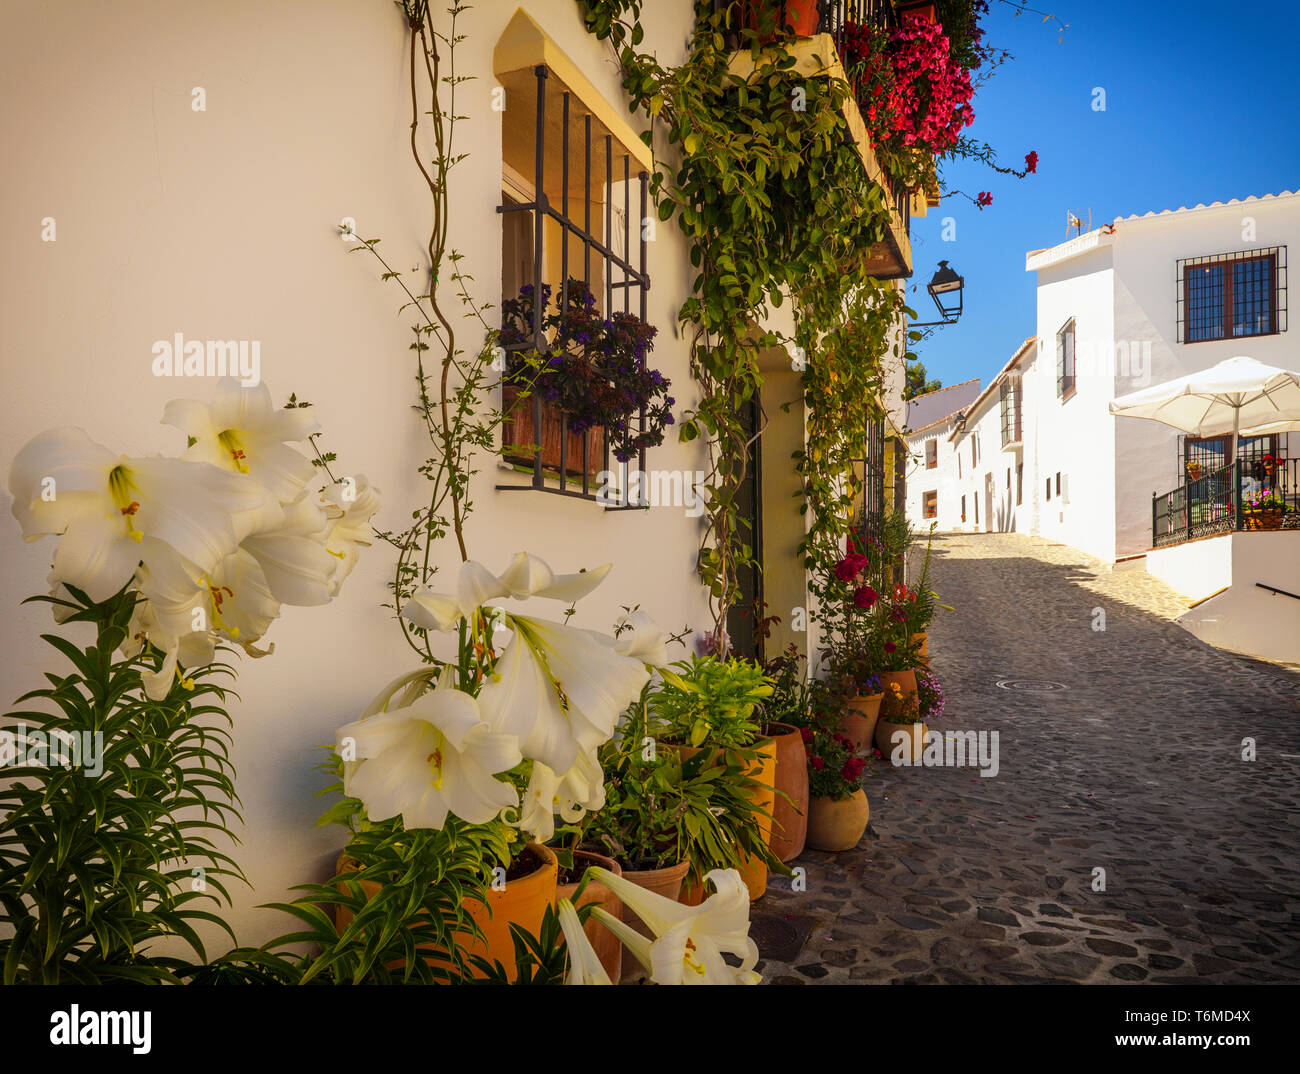 Arum lilies and a vertical garden in Macharaviaya, mountain village and home to international artists, Province of Málaga, Andalusia, Spain Stock Photo